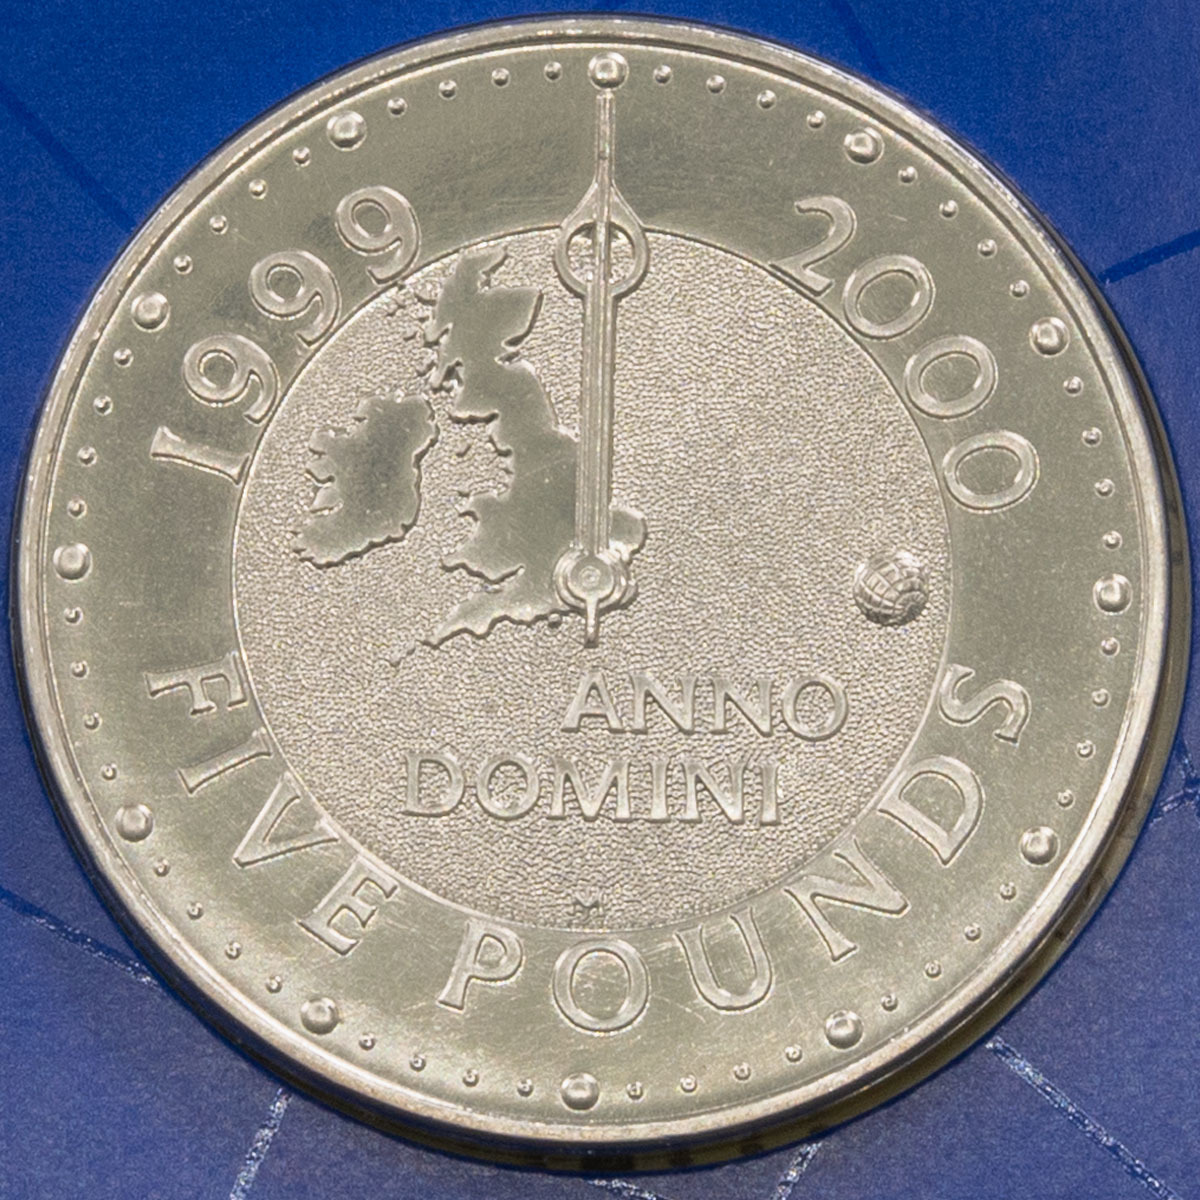 2000 Millennium Five Pound Crown Brilliant Uncirculated Coin In Folder Minted At The Dome Reverse